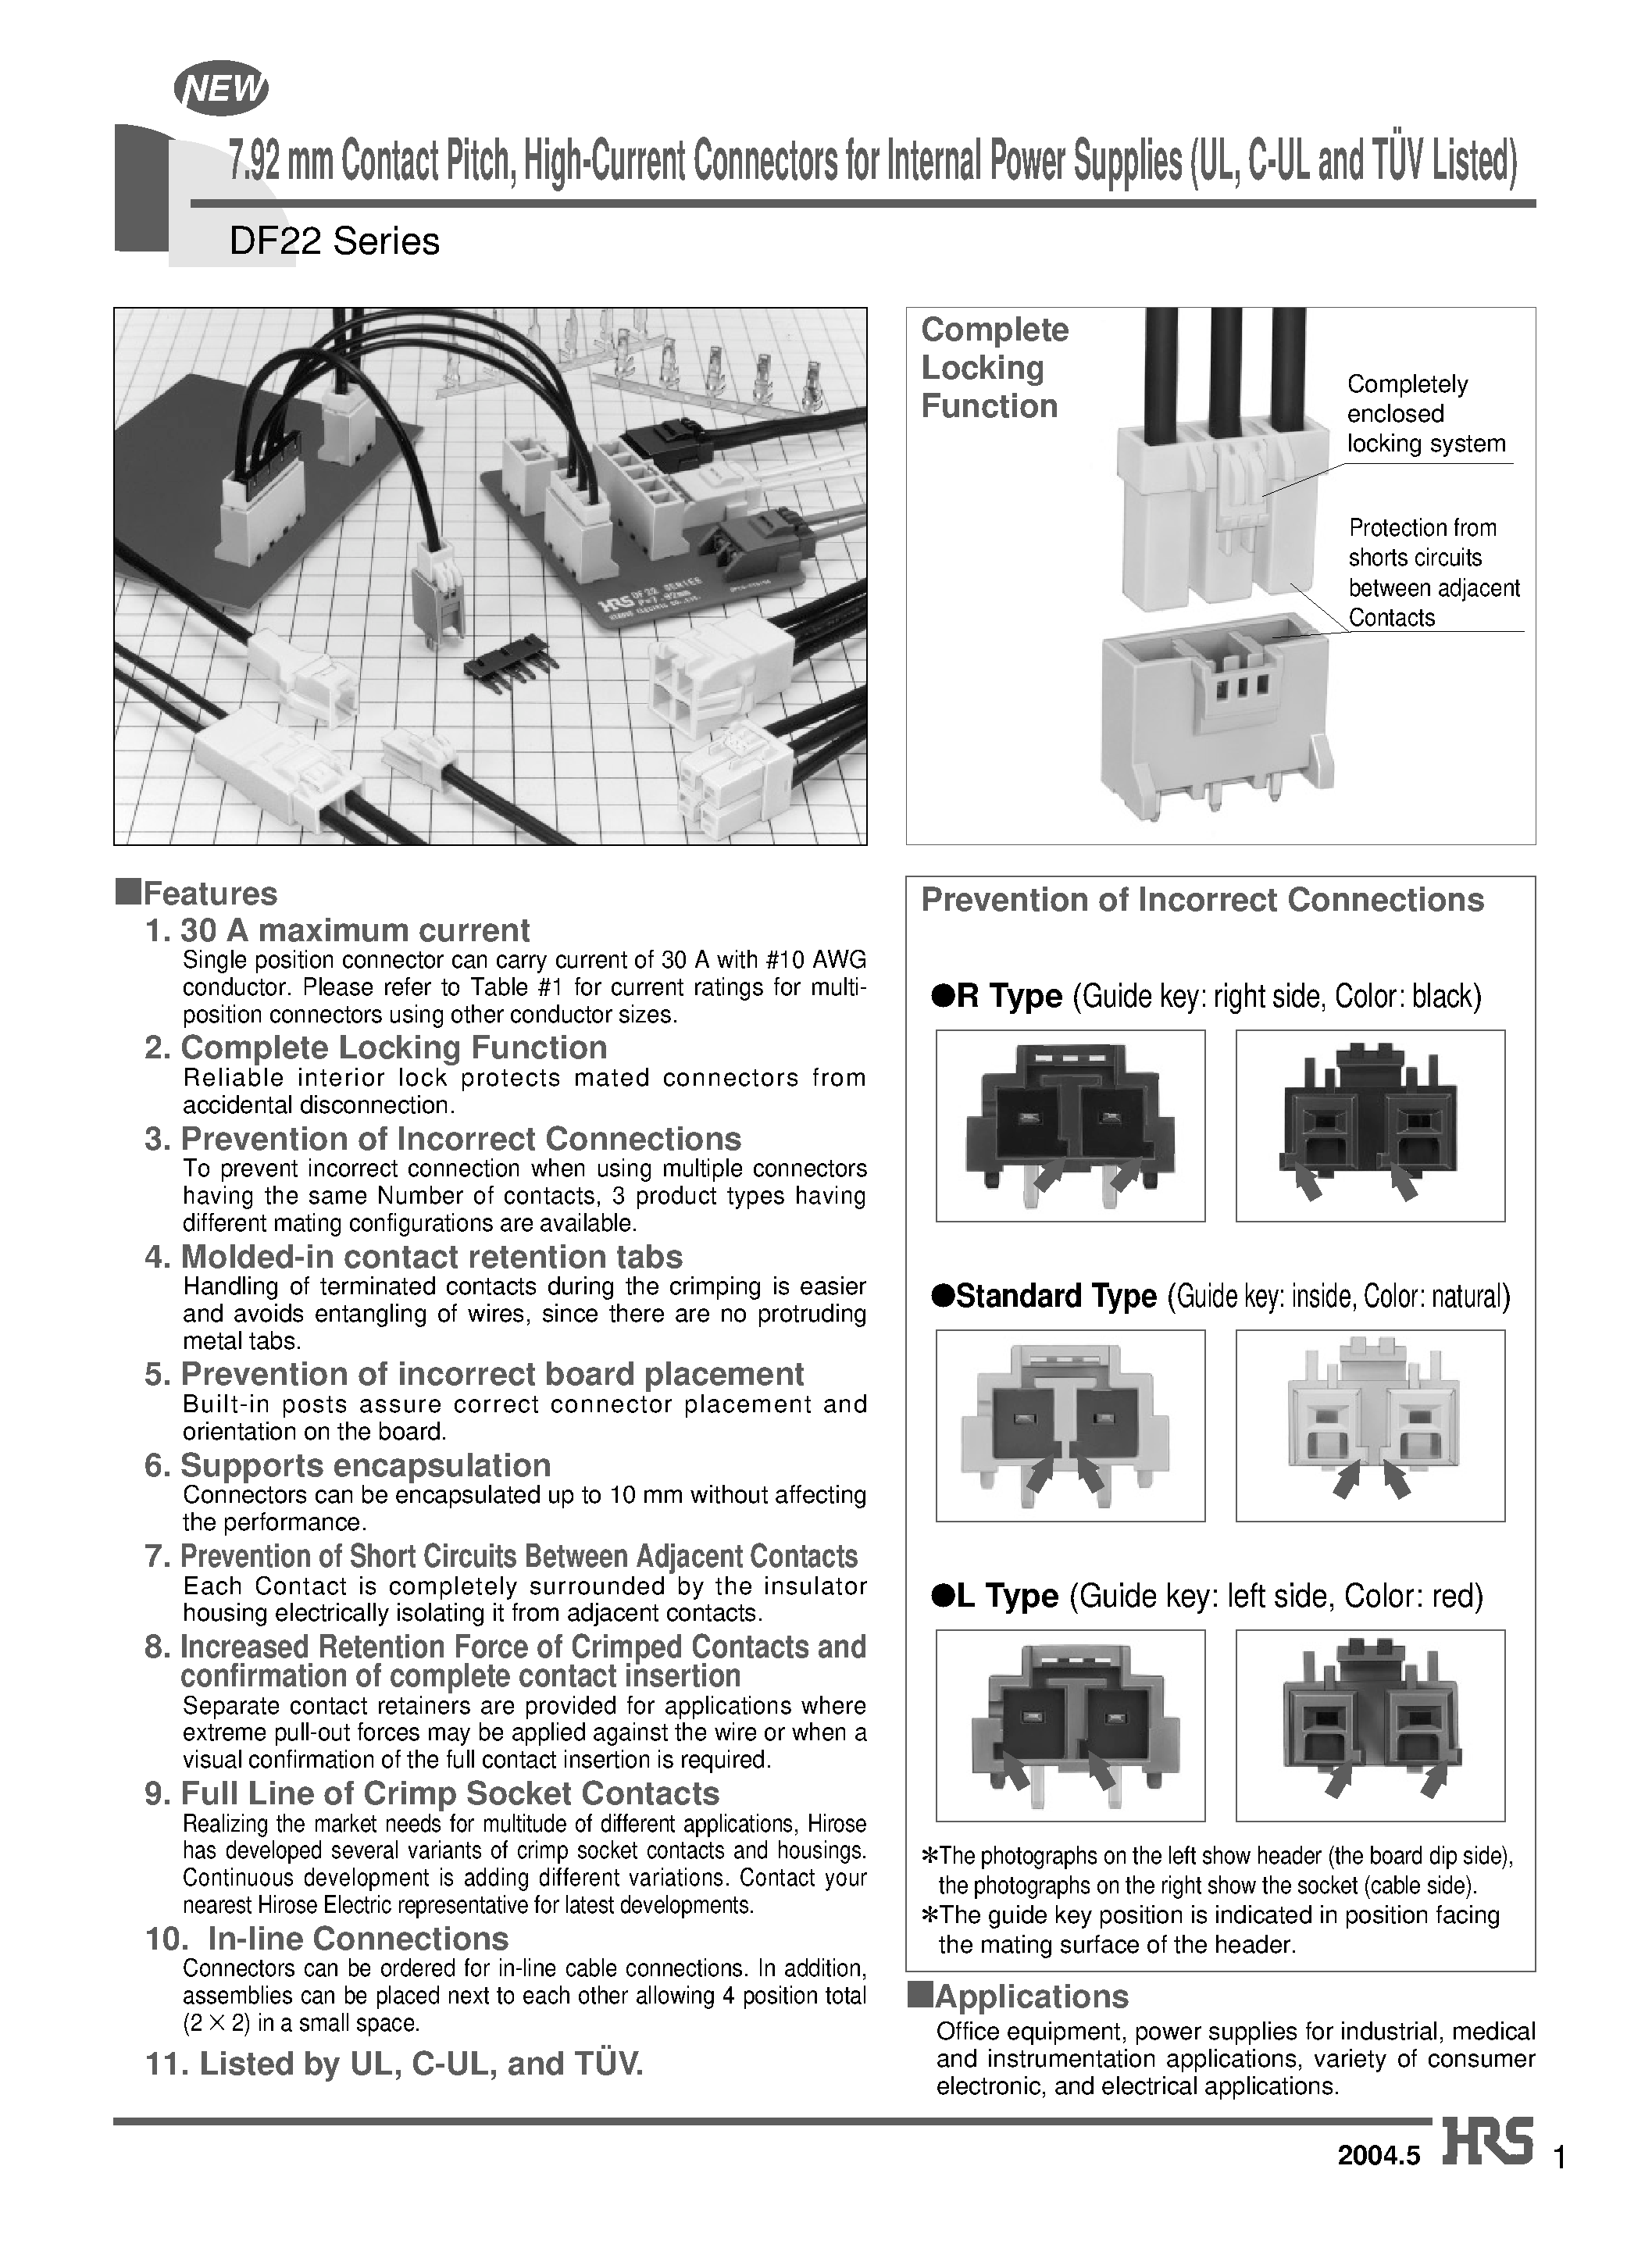 Datasheet DF22A-2S-7.92C - 7.92 mm Contact Pitch/ High-Current Connectors for Internal Power Supplies (UL/ C-UL and TUV Listed) page 1